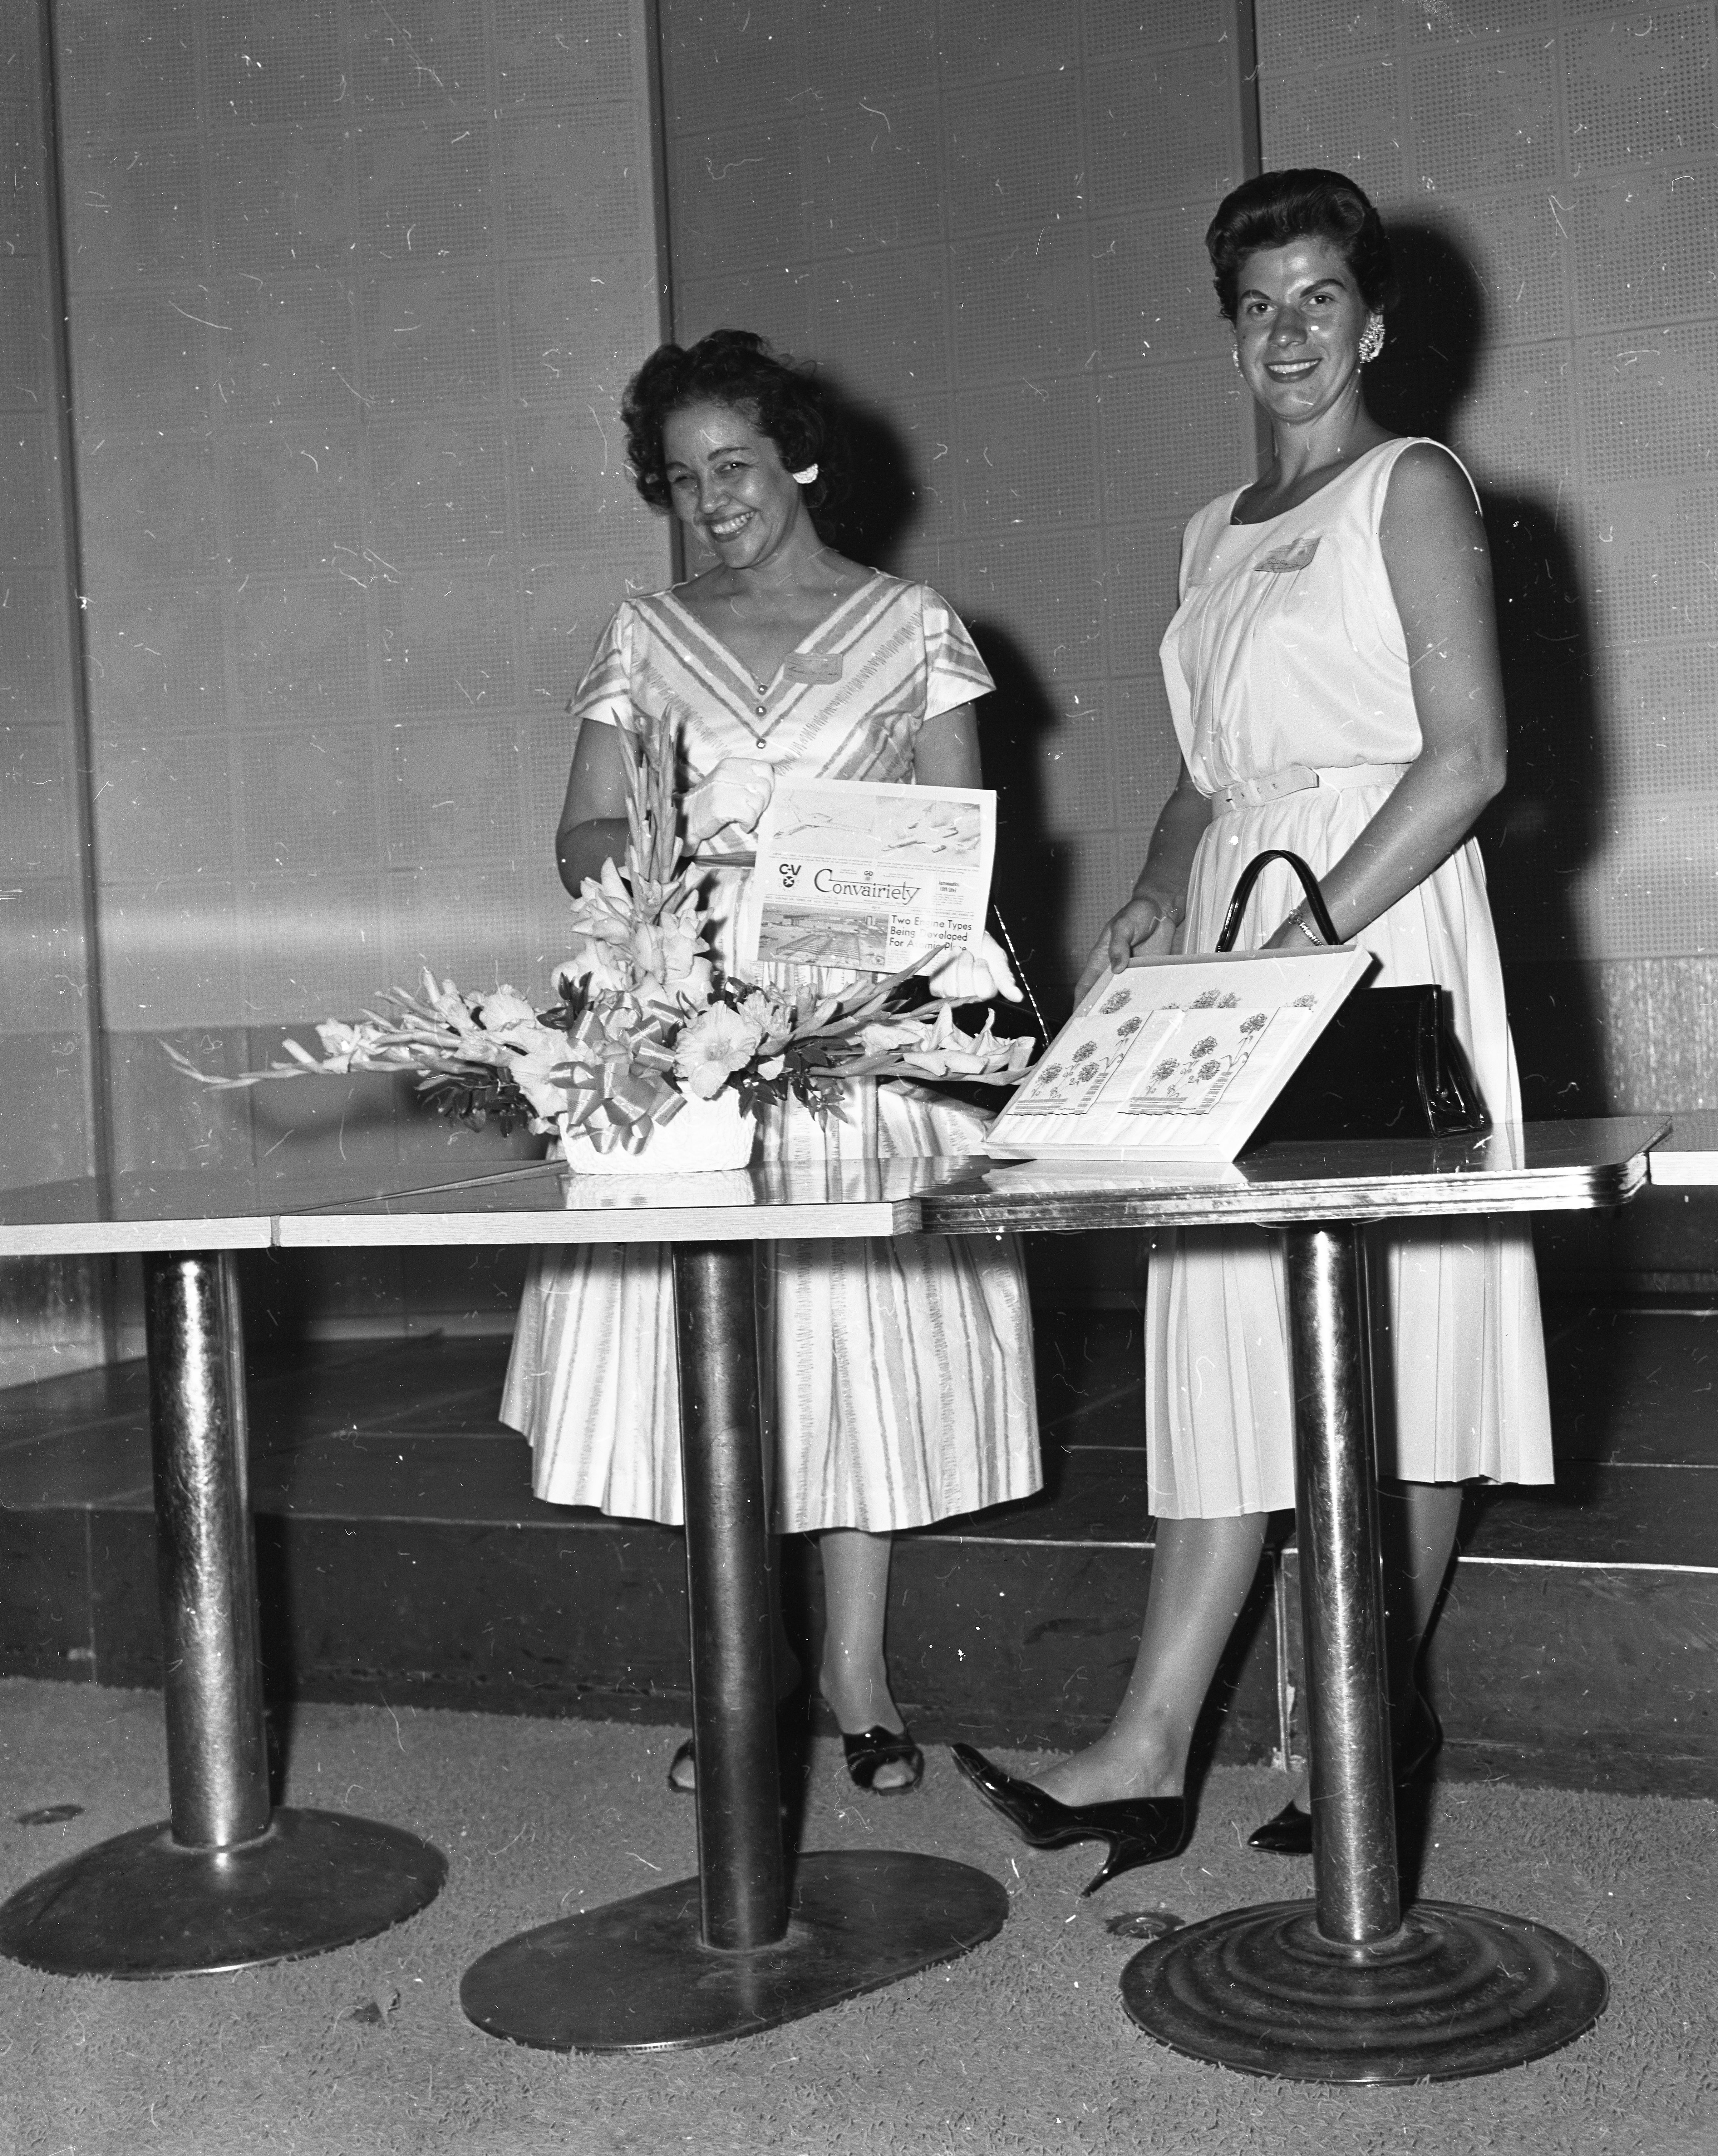 One woman holding gift while the other holds an issue of the Convairiety magazine.